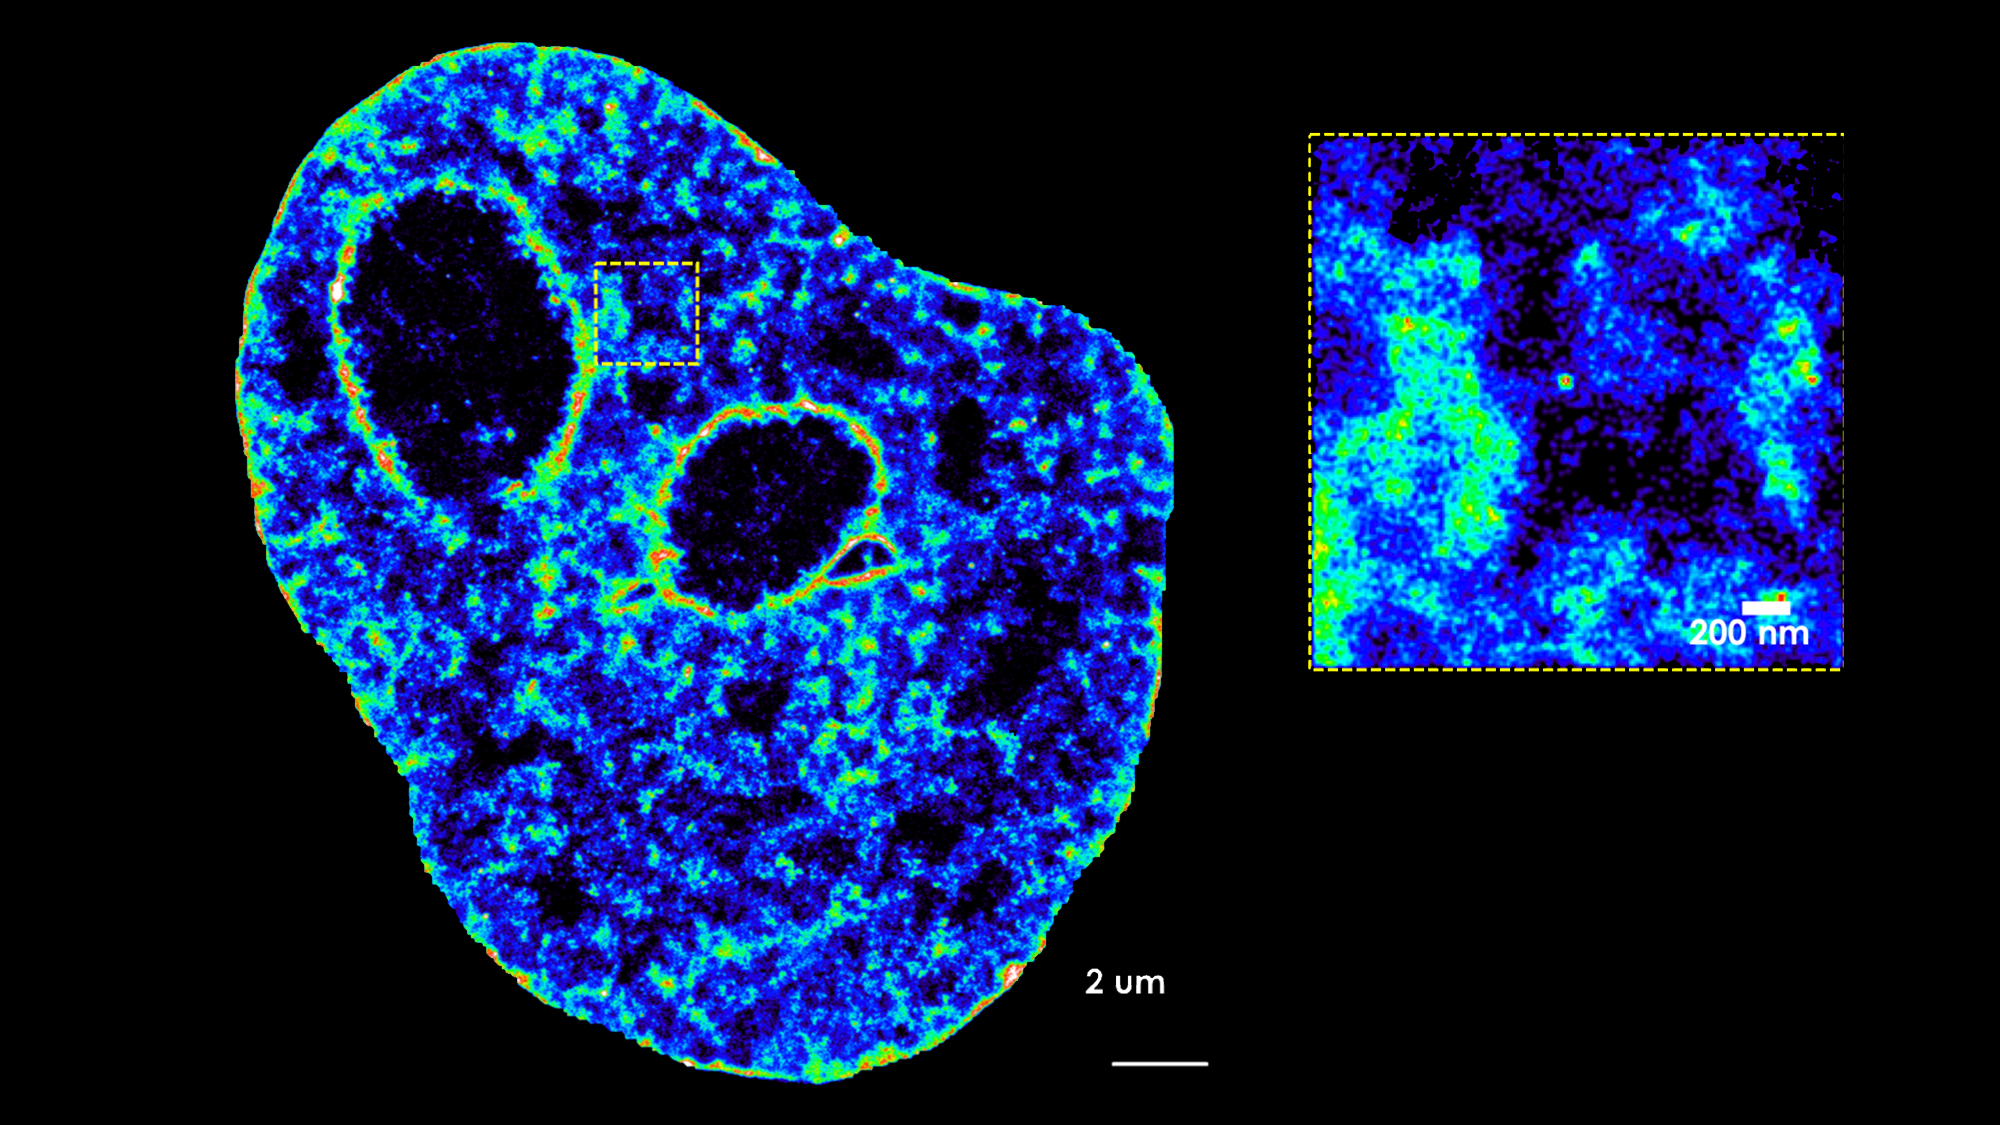 image of the nucleus of a cell obtained by conventional microscopy and enlargement of a fragment made with state-of-the-art microscopy.